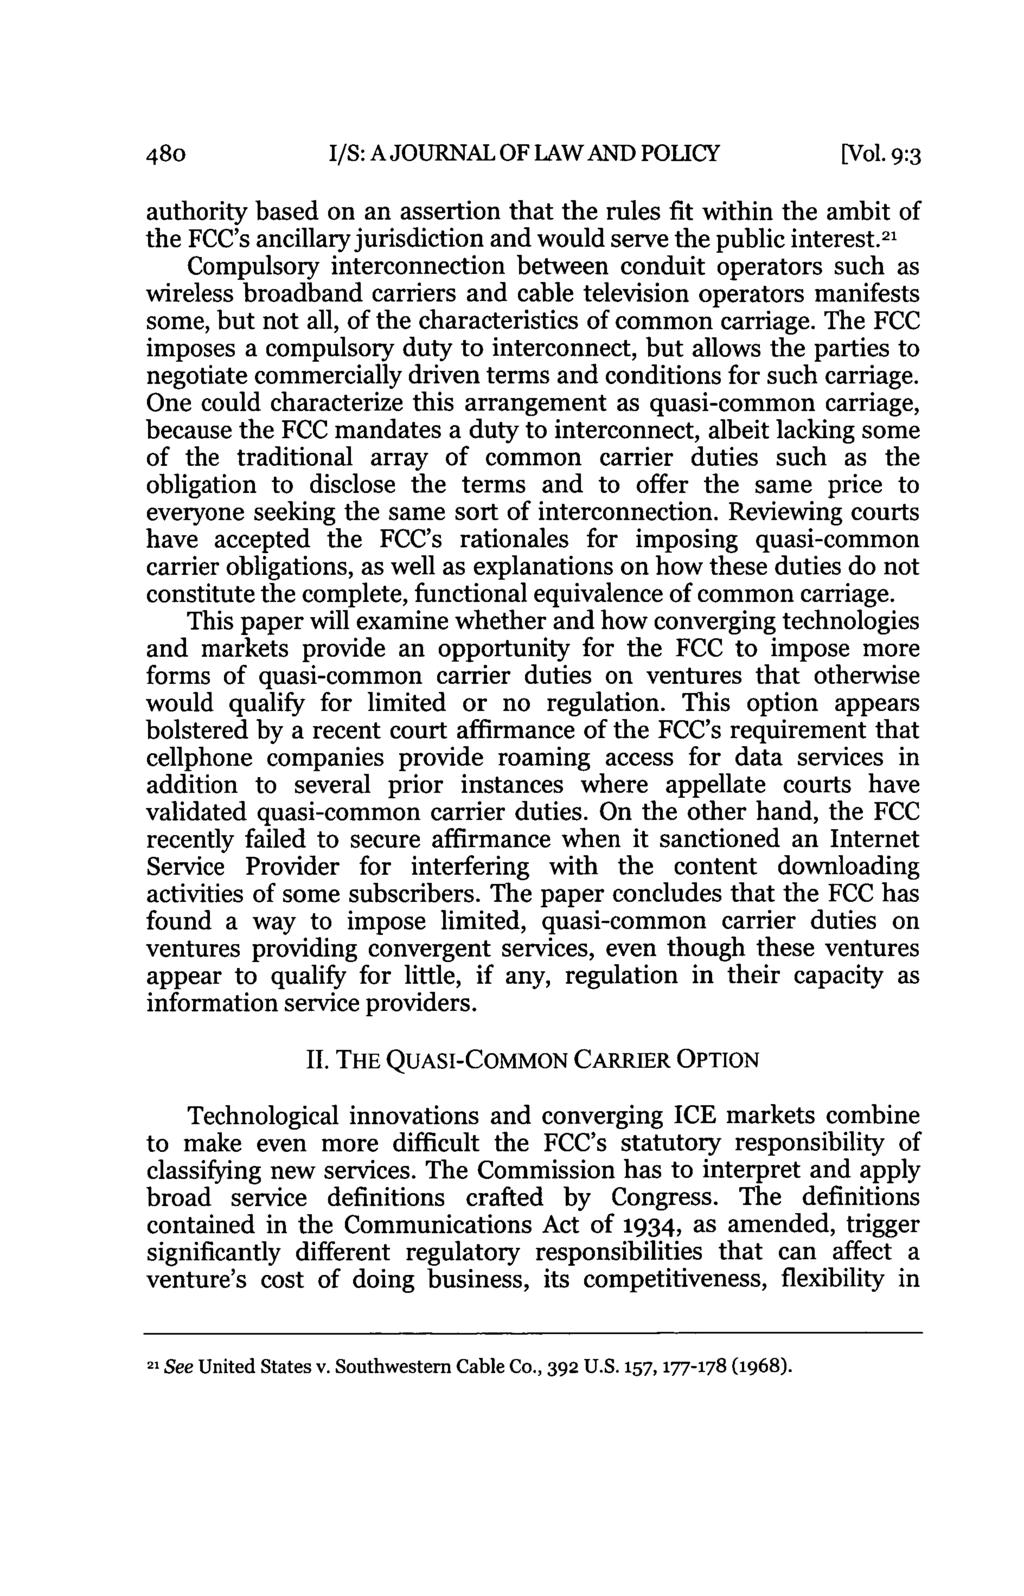 480o I/S: A JOURNAL OF LAW AND POLICY [Vol. 9:3 authority based on an assertion that the rules fit within the ambit of the FCC's ancillary jurisdiction and would serve the public interest.